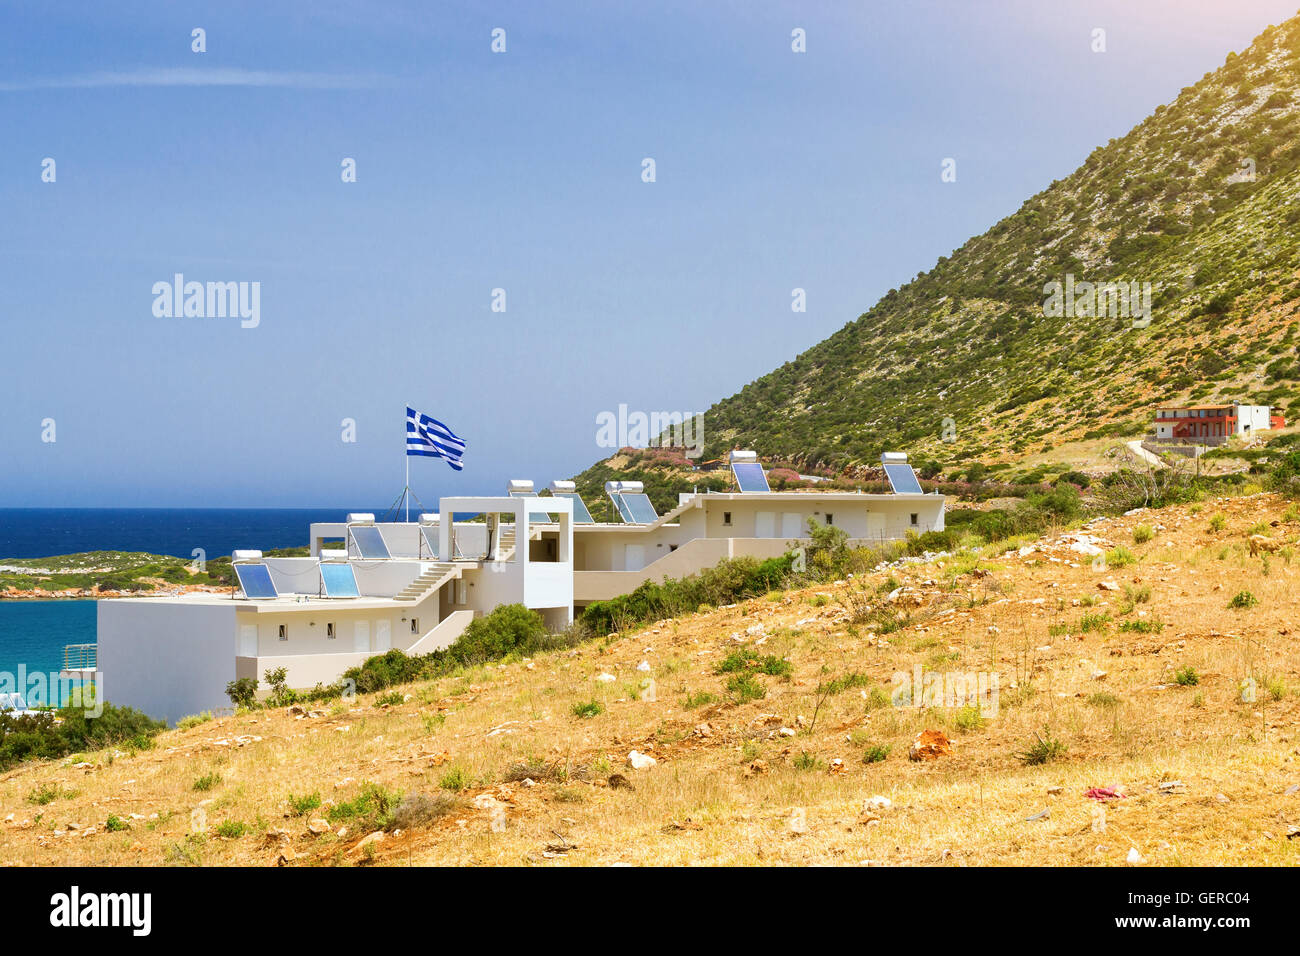 Modern Greek architecture, new white building in constructivist style, stands on shore of Cretan sea on roof mounted solar panel Stock Photo